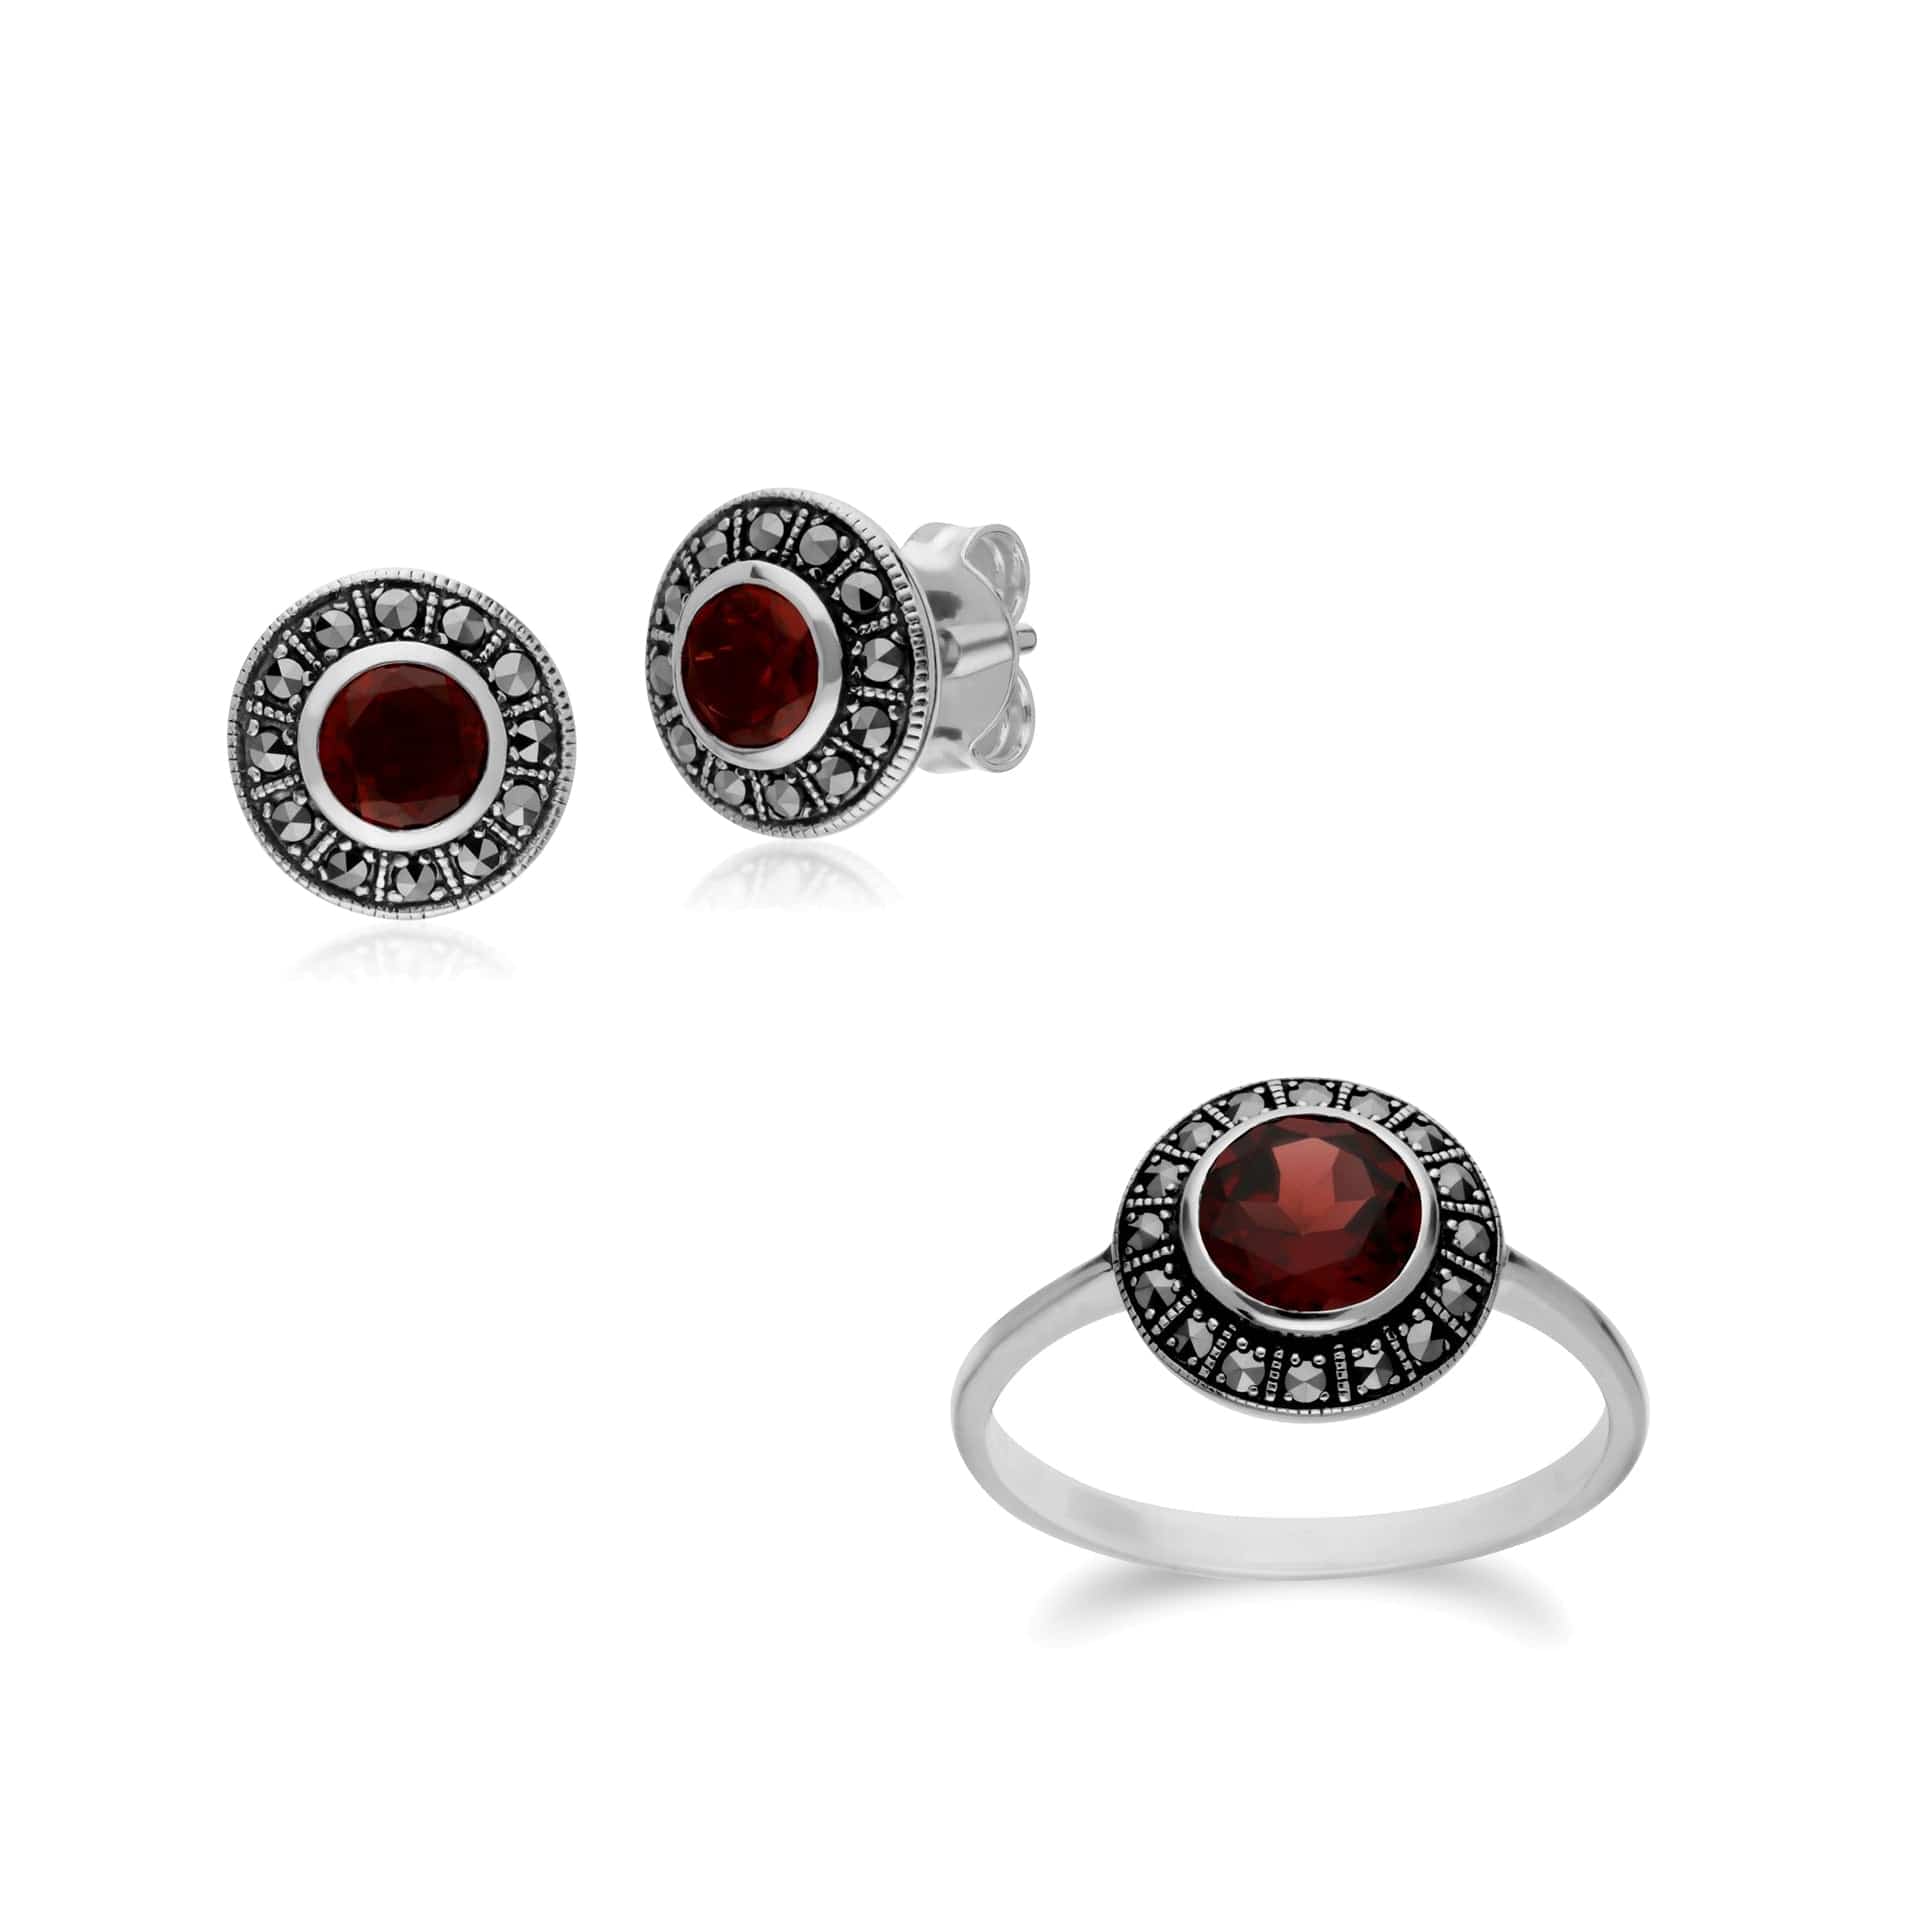 214E872703925-214R605603925 Art Deco Style Round Garnet and Marcasite Cluster Stud Earrings & Ring Set in 925 Sterling Silver 1